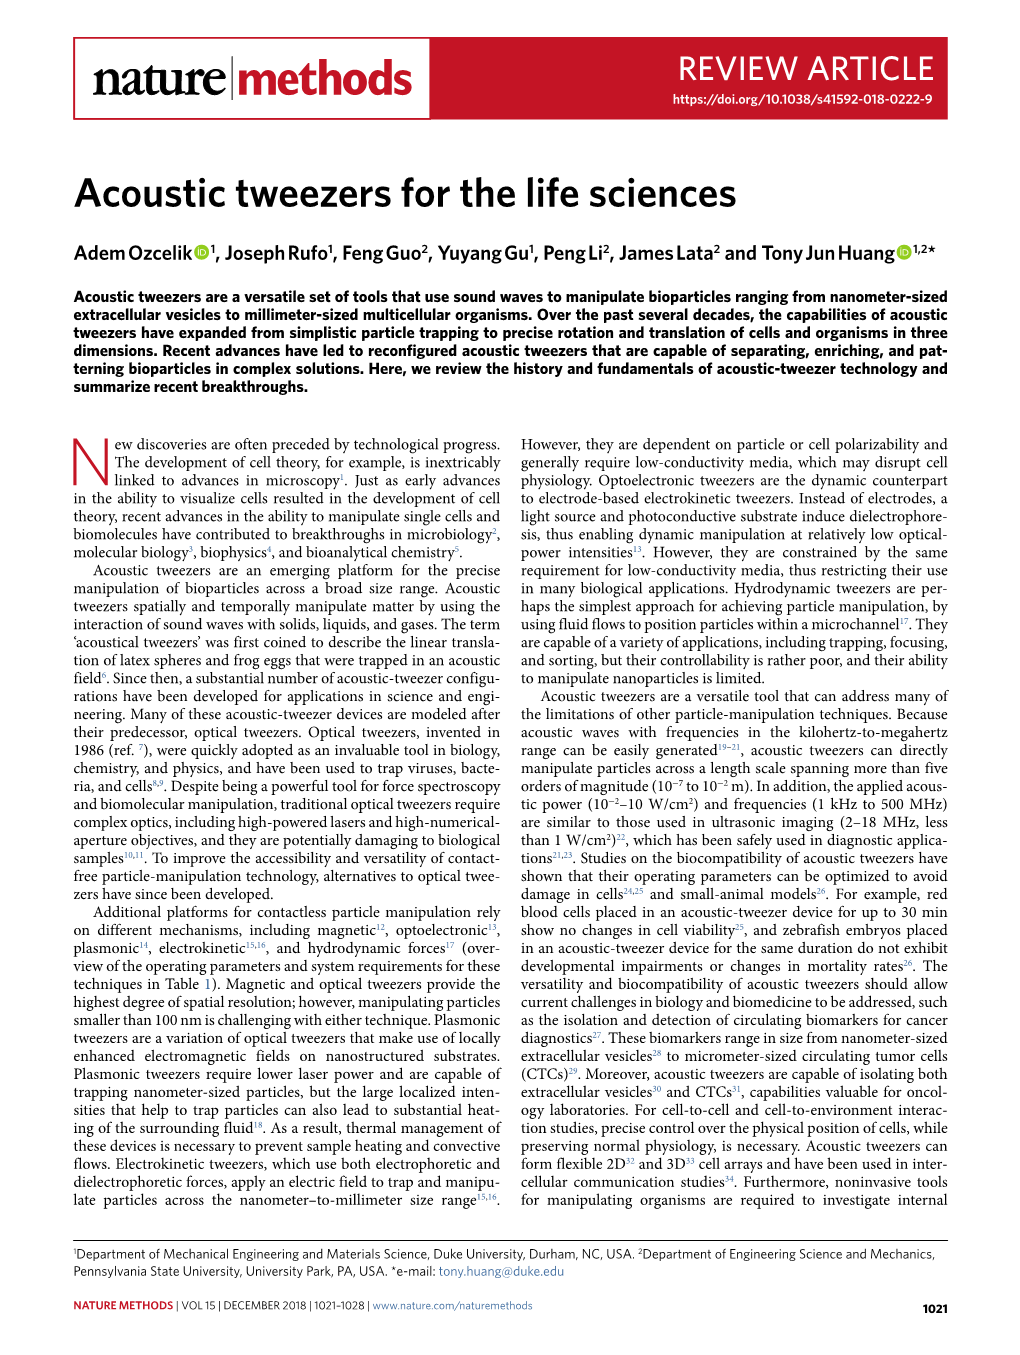 Acoustic Tweezers for the Life Sciences